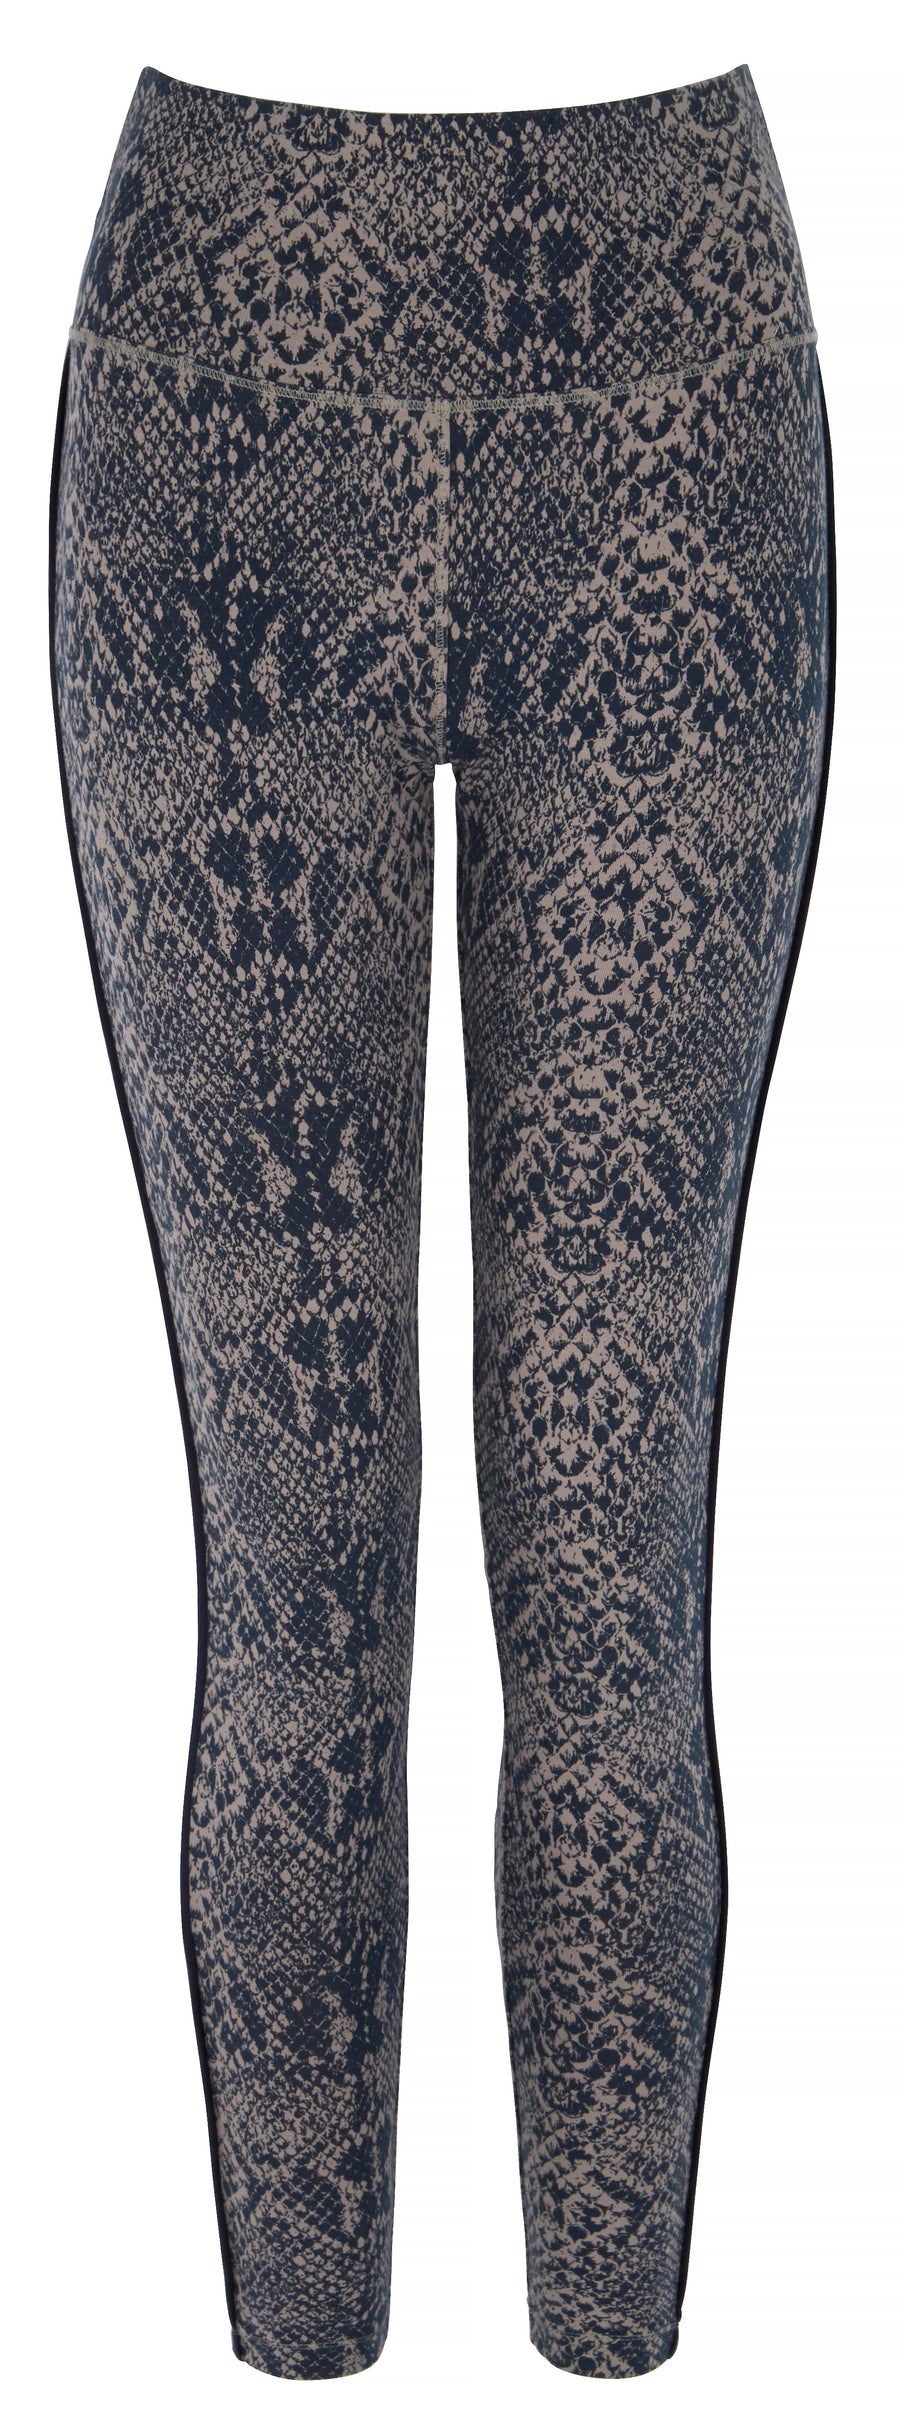 Flow With It Leggings - Snake, Navy - Asquith